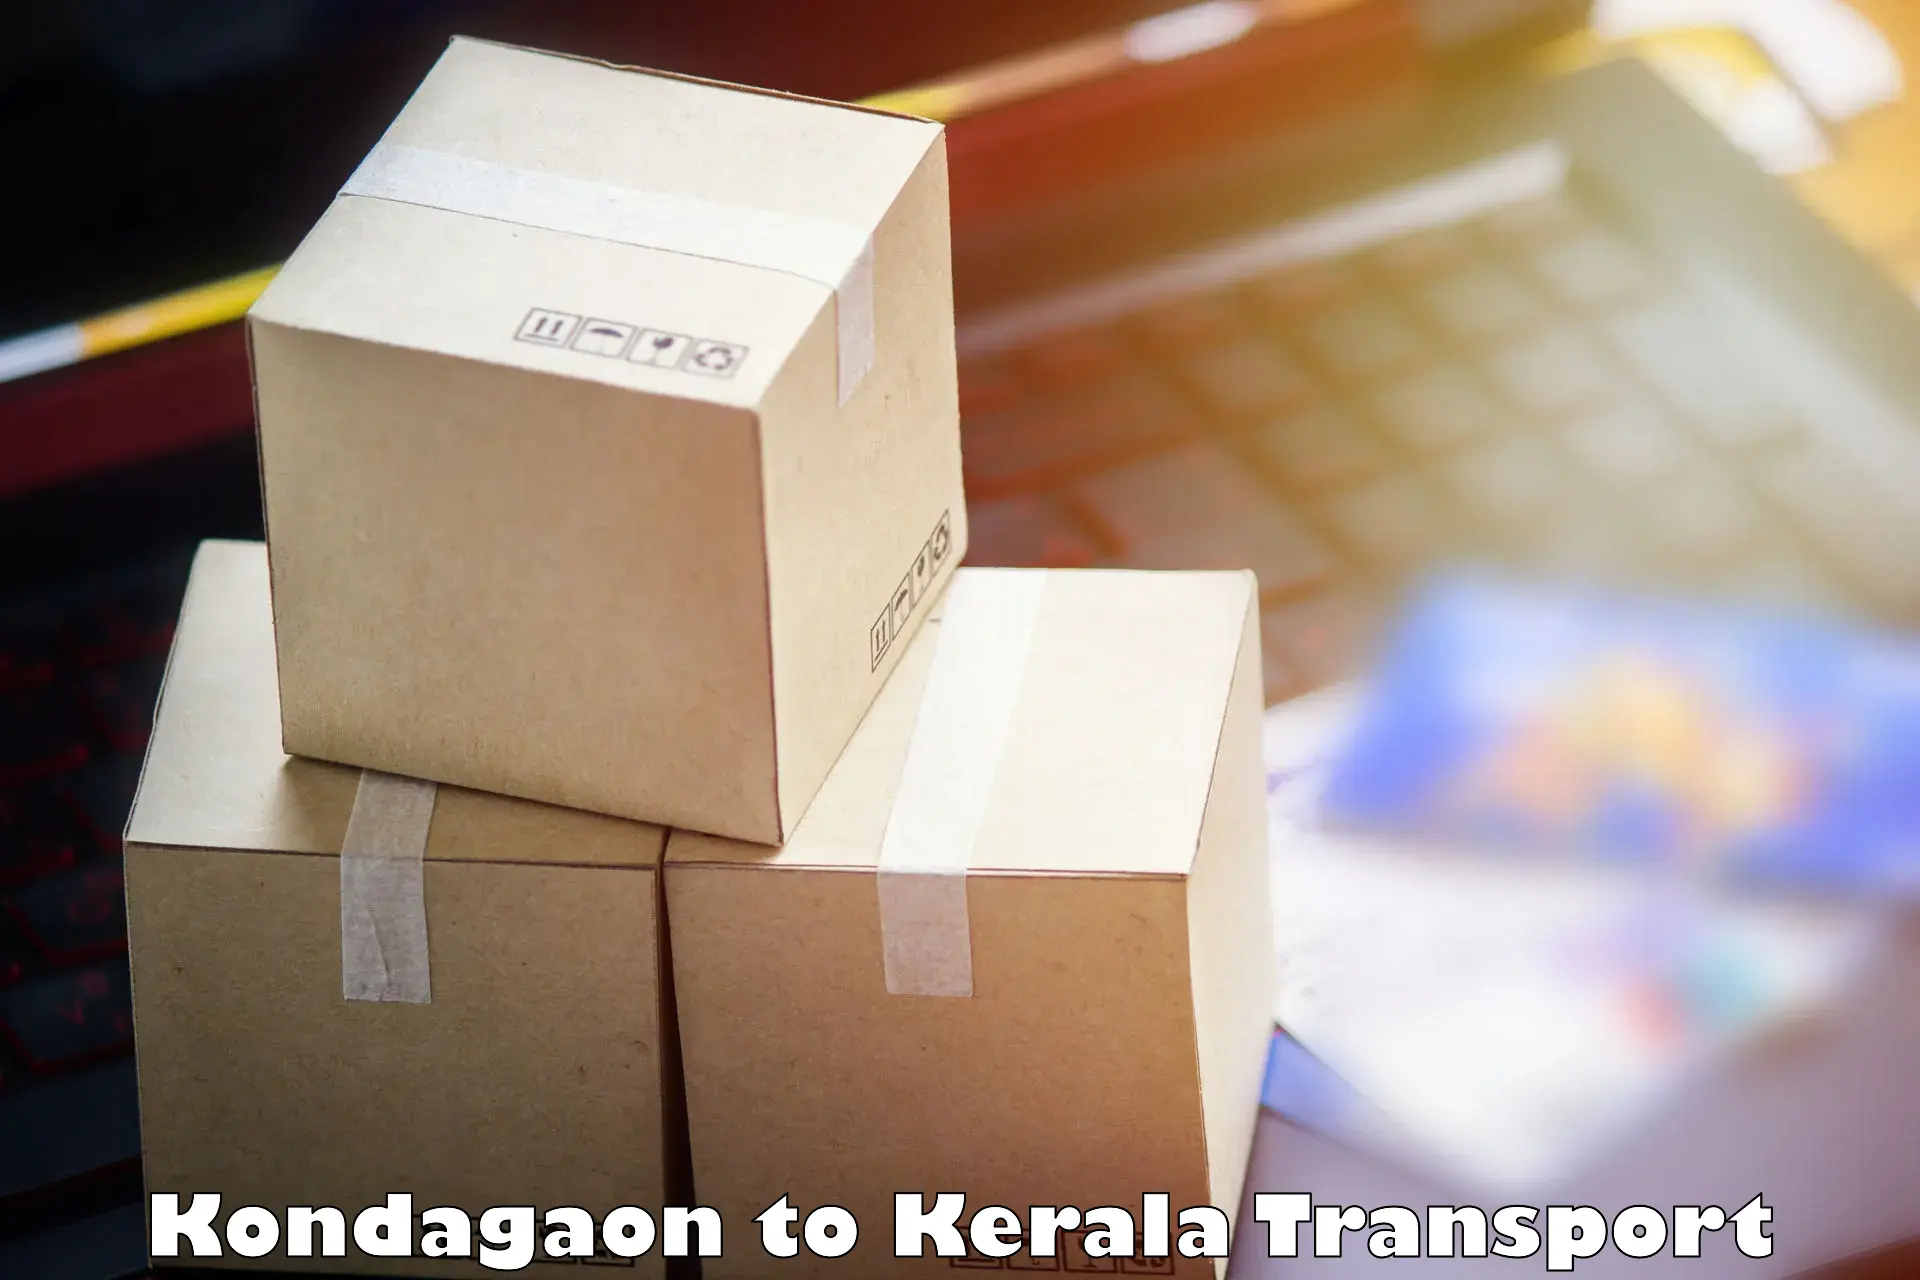 Nearby transport service Kondagaon to Peravoor